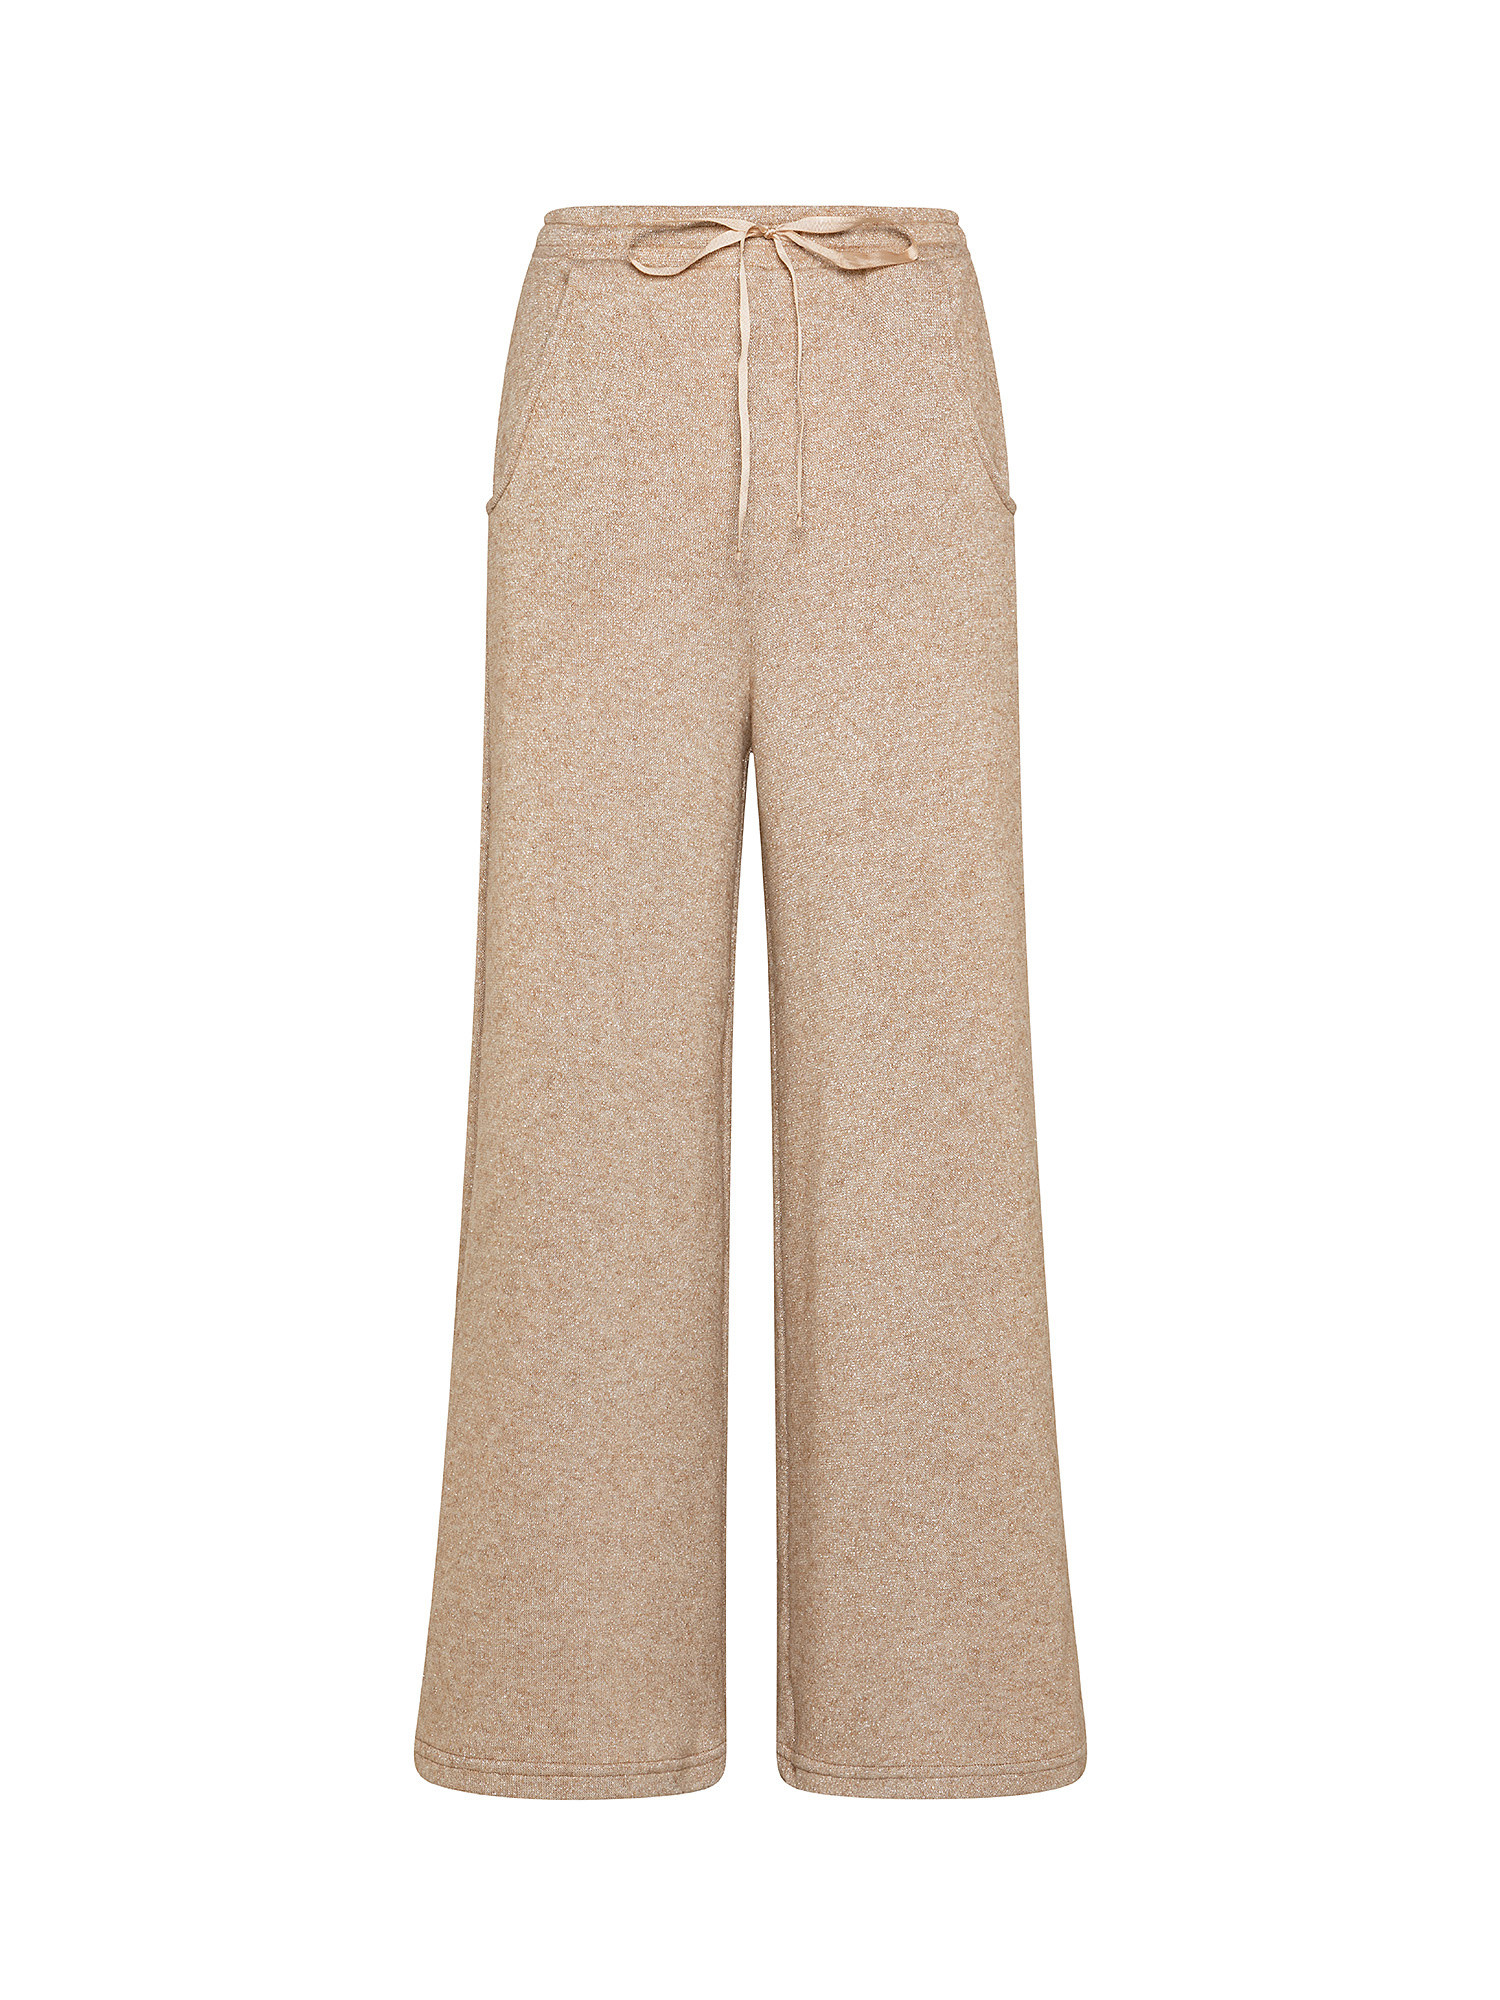 Lurex fleece trousers with drawstring at the waist, Beige, large image number 0